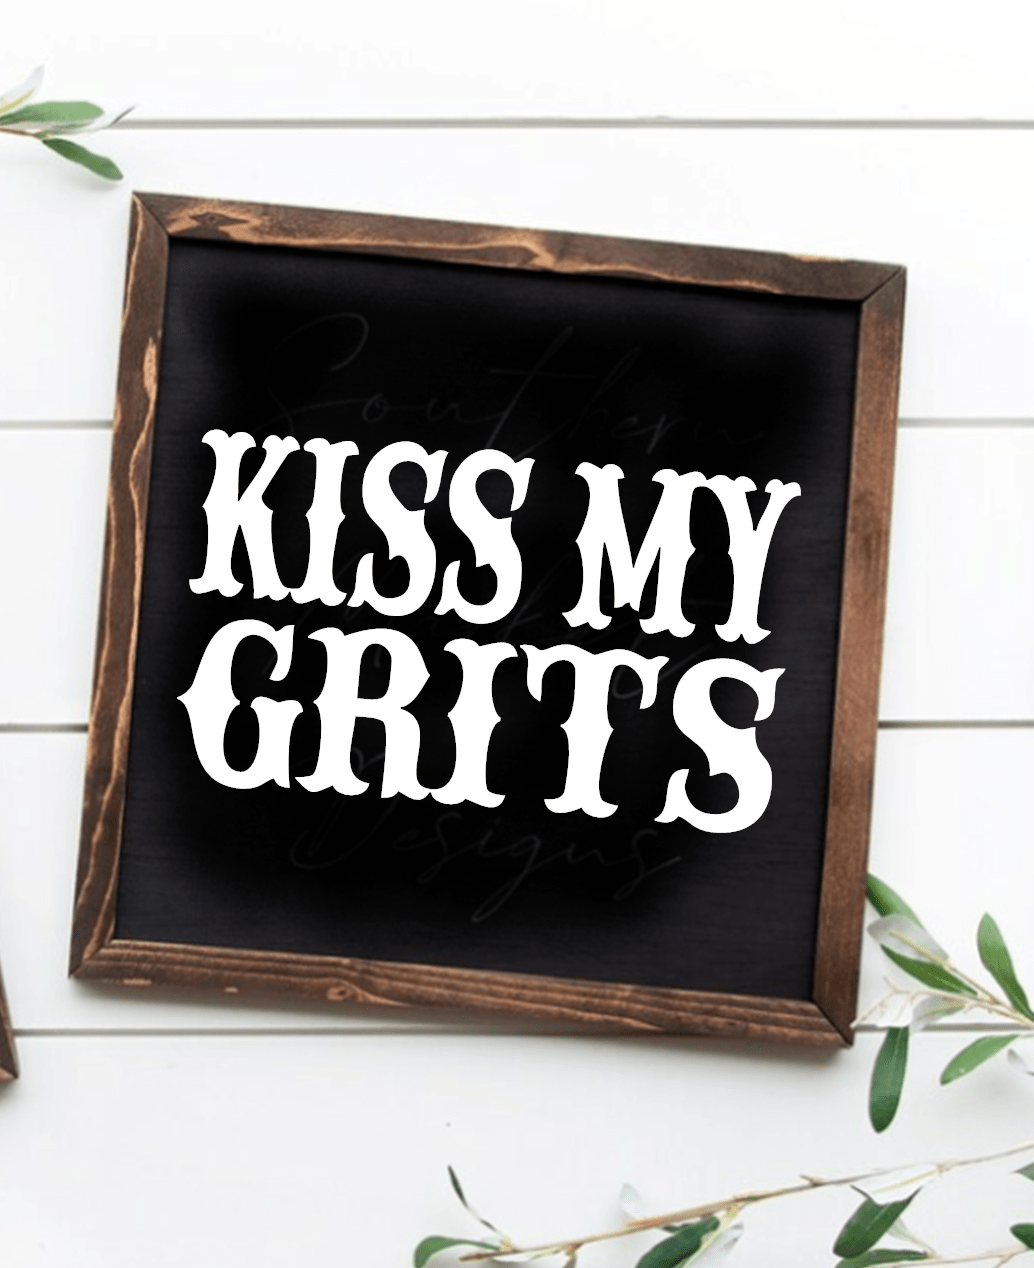 Purple LadyBug Decor Sign Kiss My Grits Framed Wood Sign | Handcrafted Sign